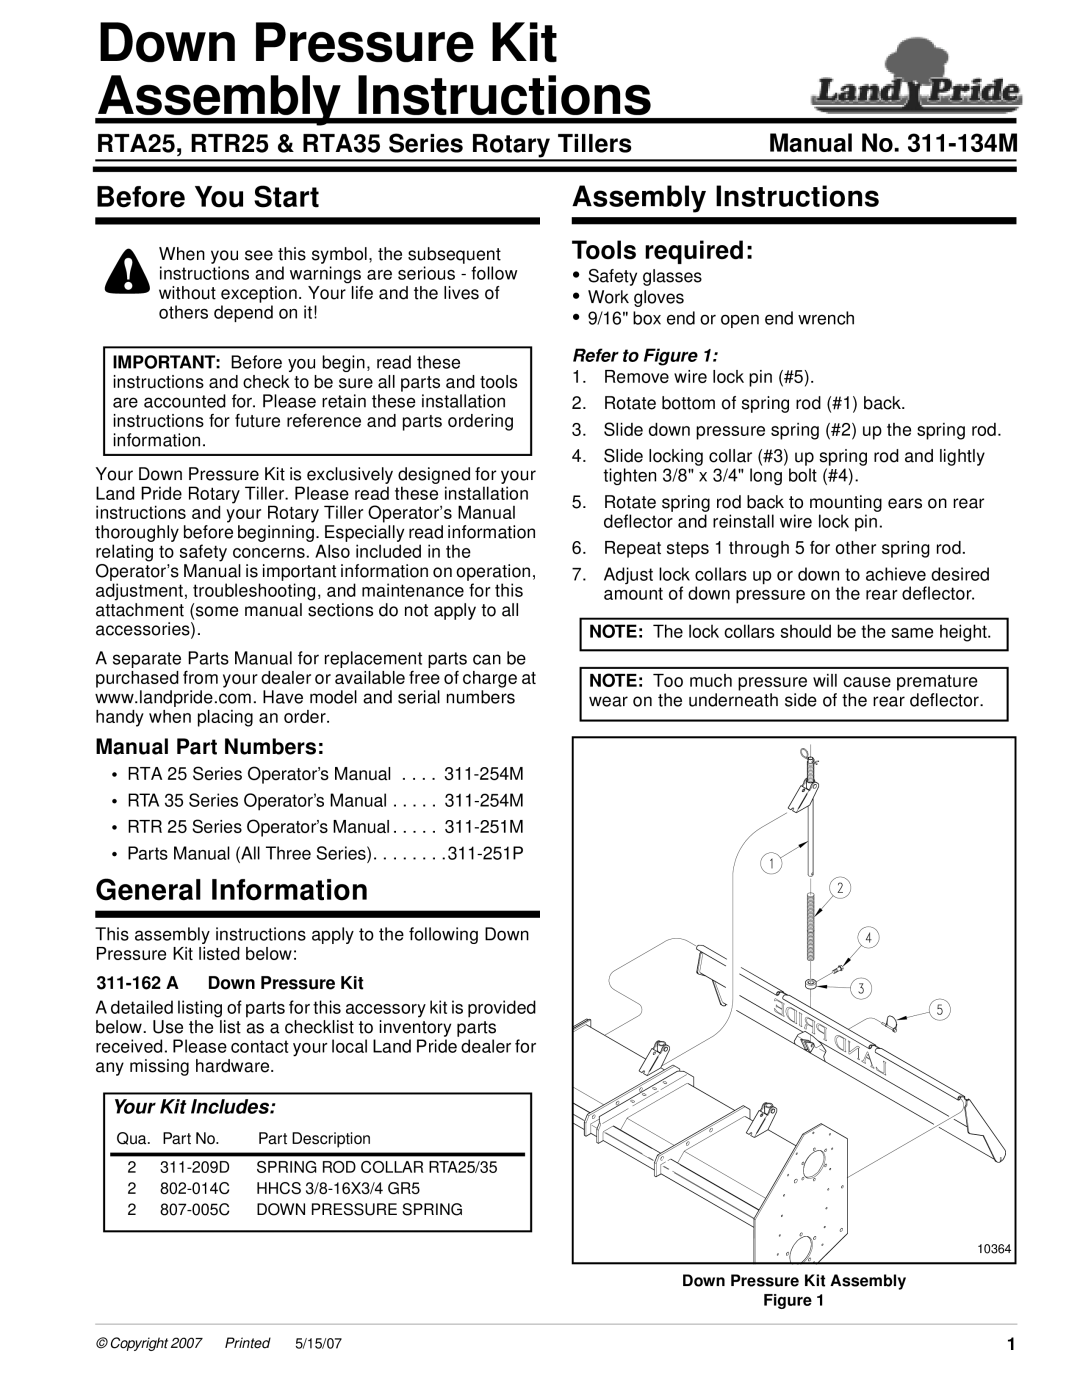 Land Pride RTA35 installation instructions Down Pressure Kit Assembly Instructions, Before You Start, General Information 